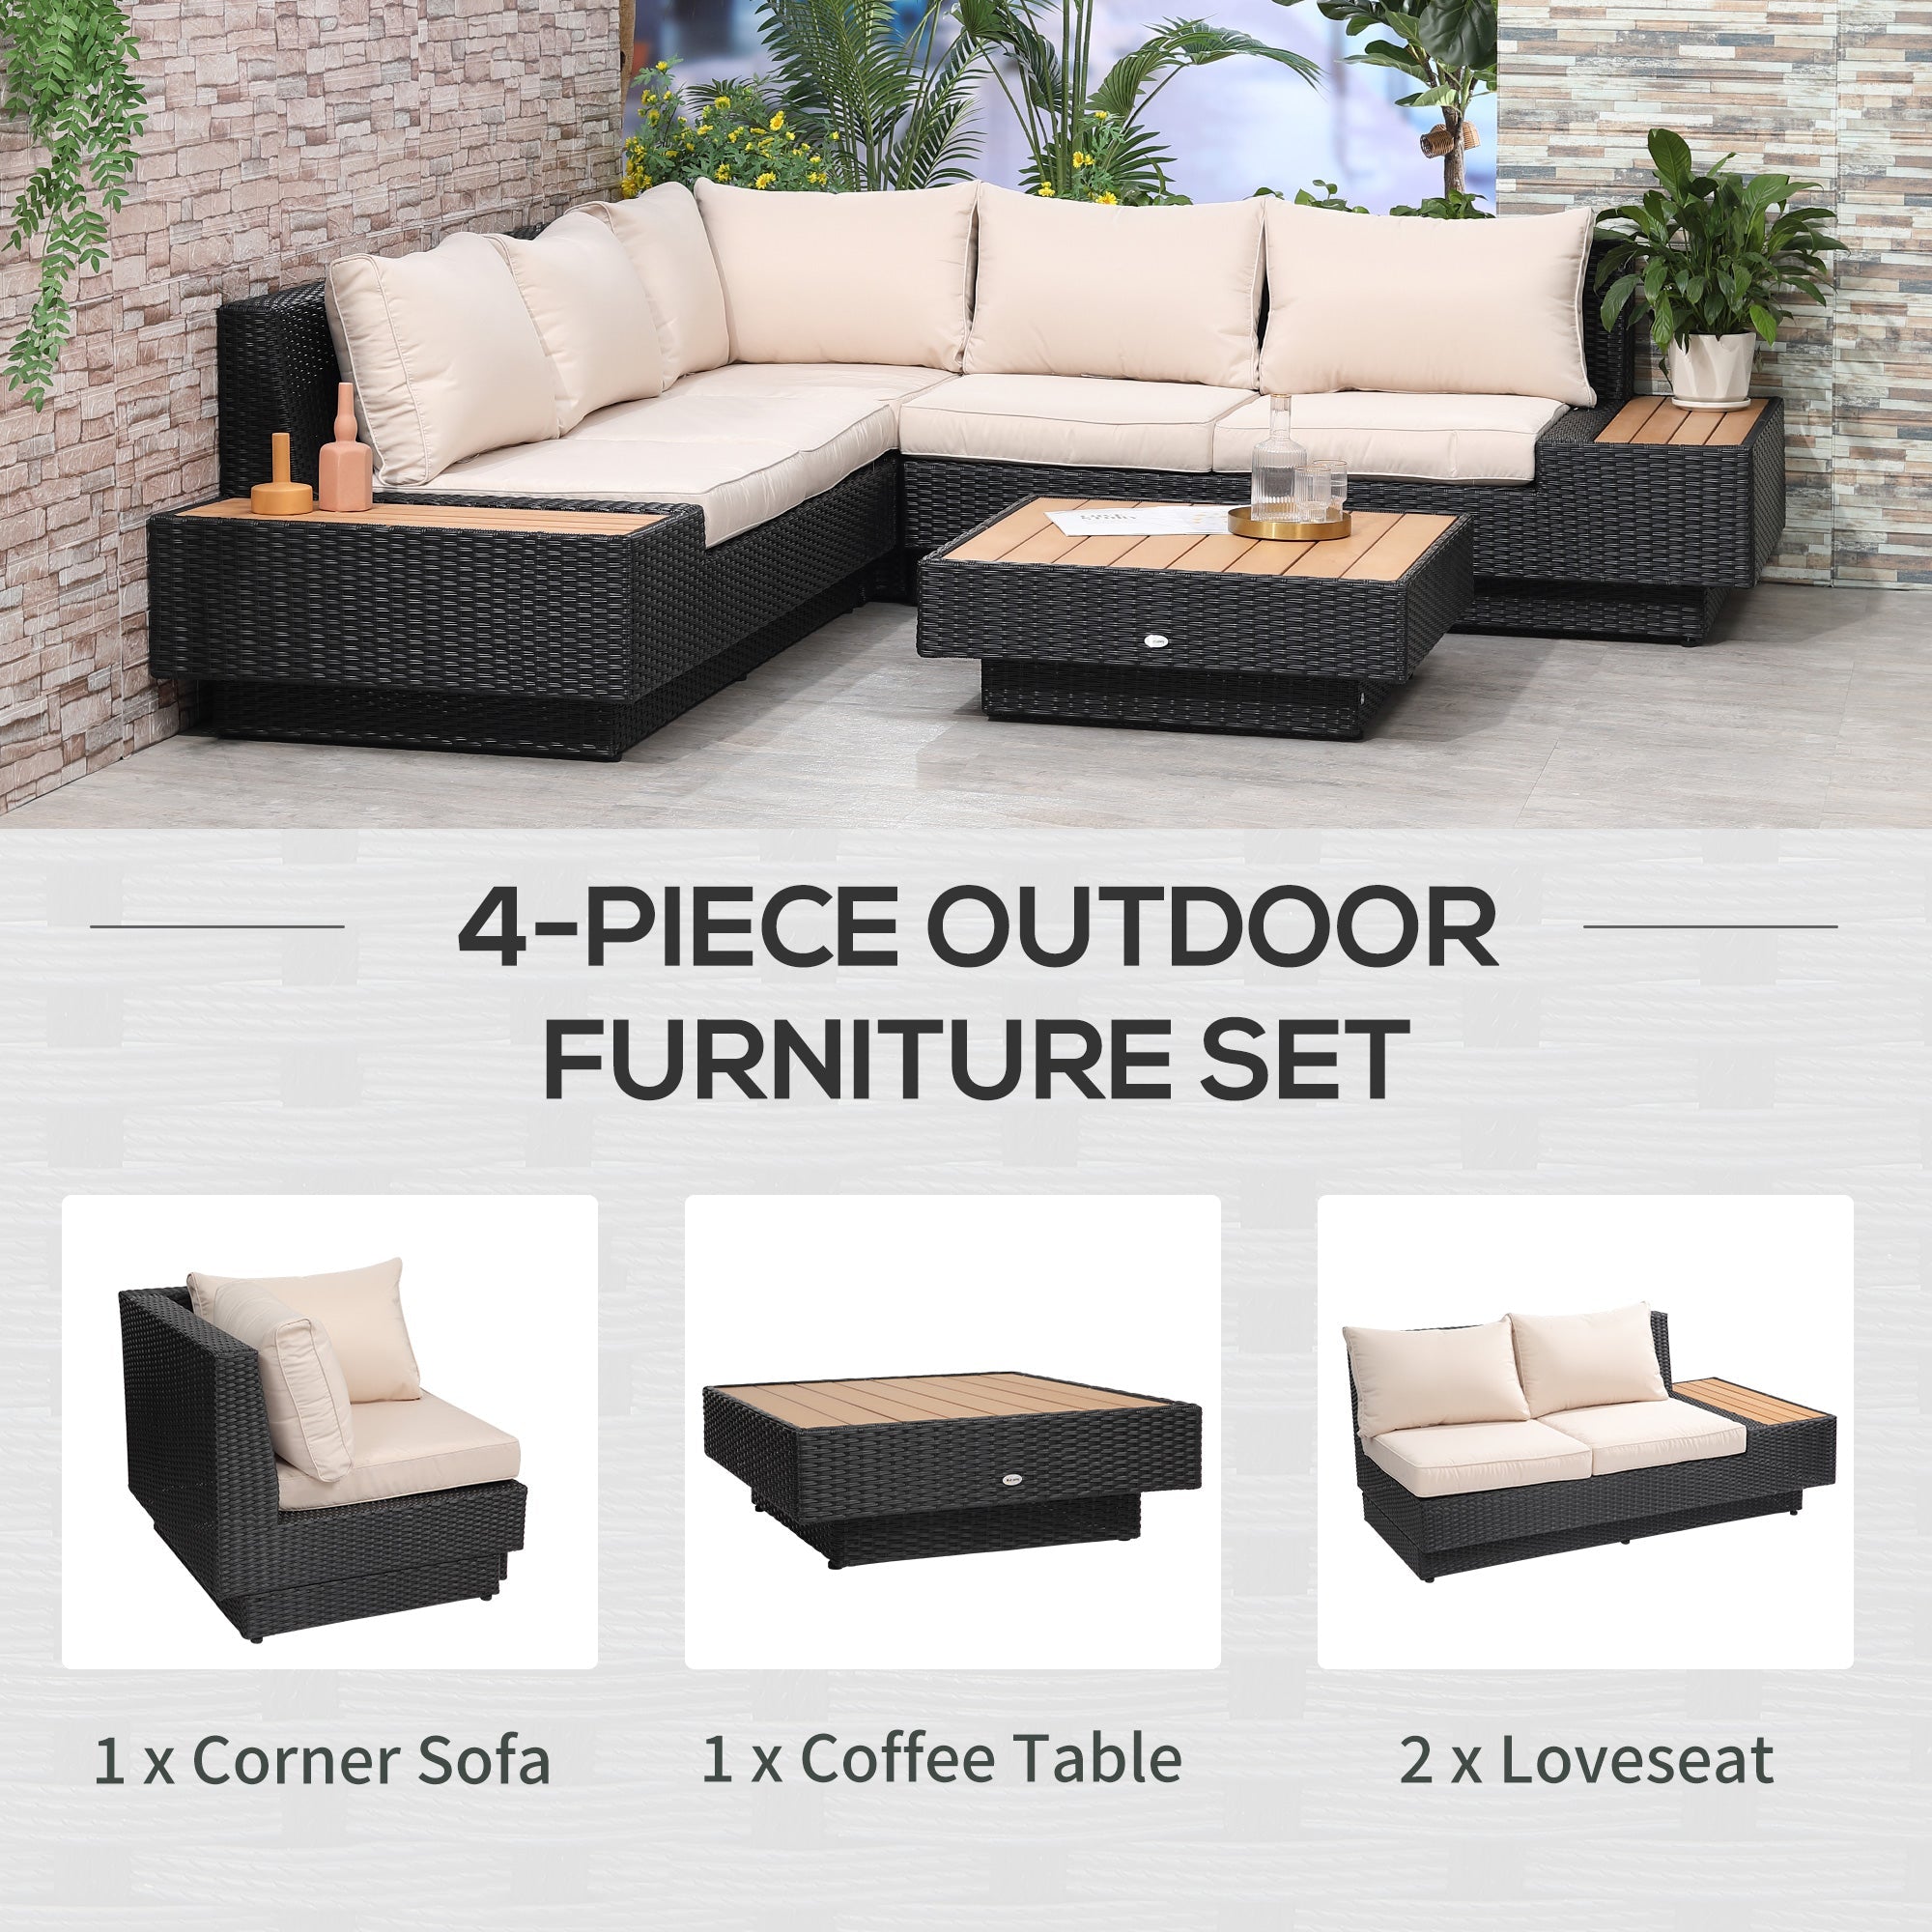 5-Seater Rattan Garden Furniture Outdoor Sectional Corner Sofa and Coffee Table Set Conservatory Wicker Weave w/ Armrest and Cushions, Black-4